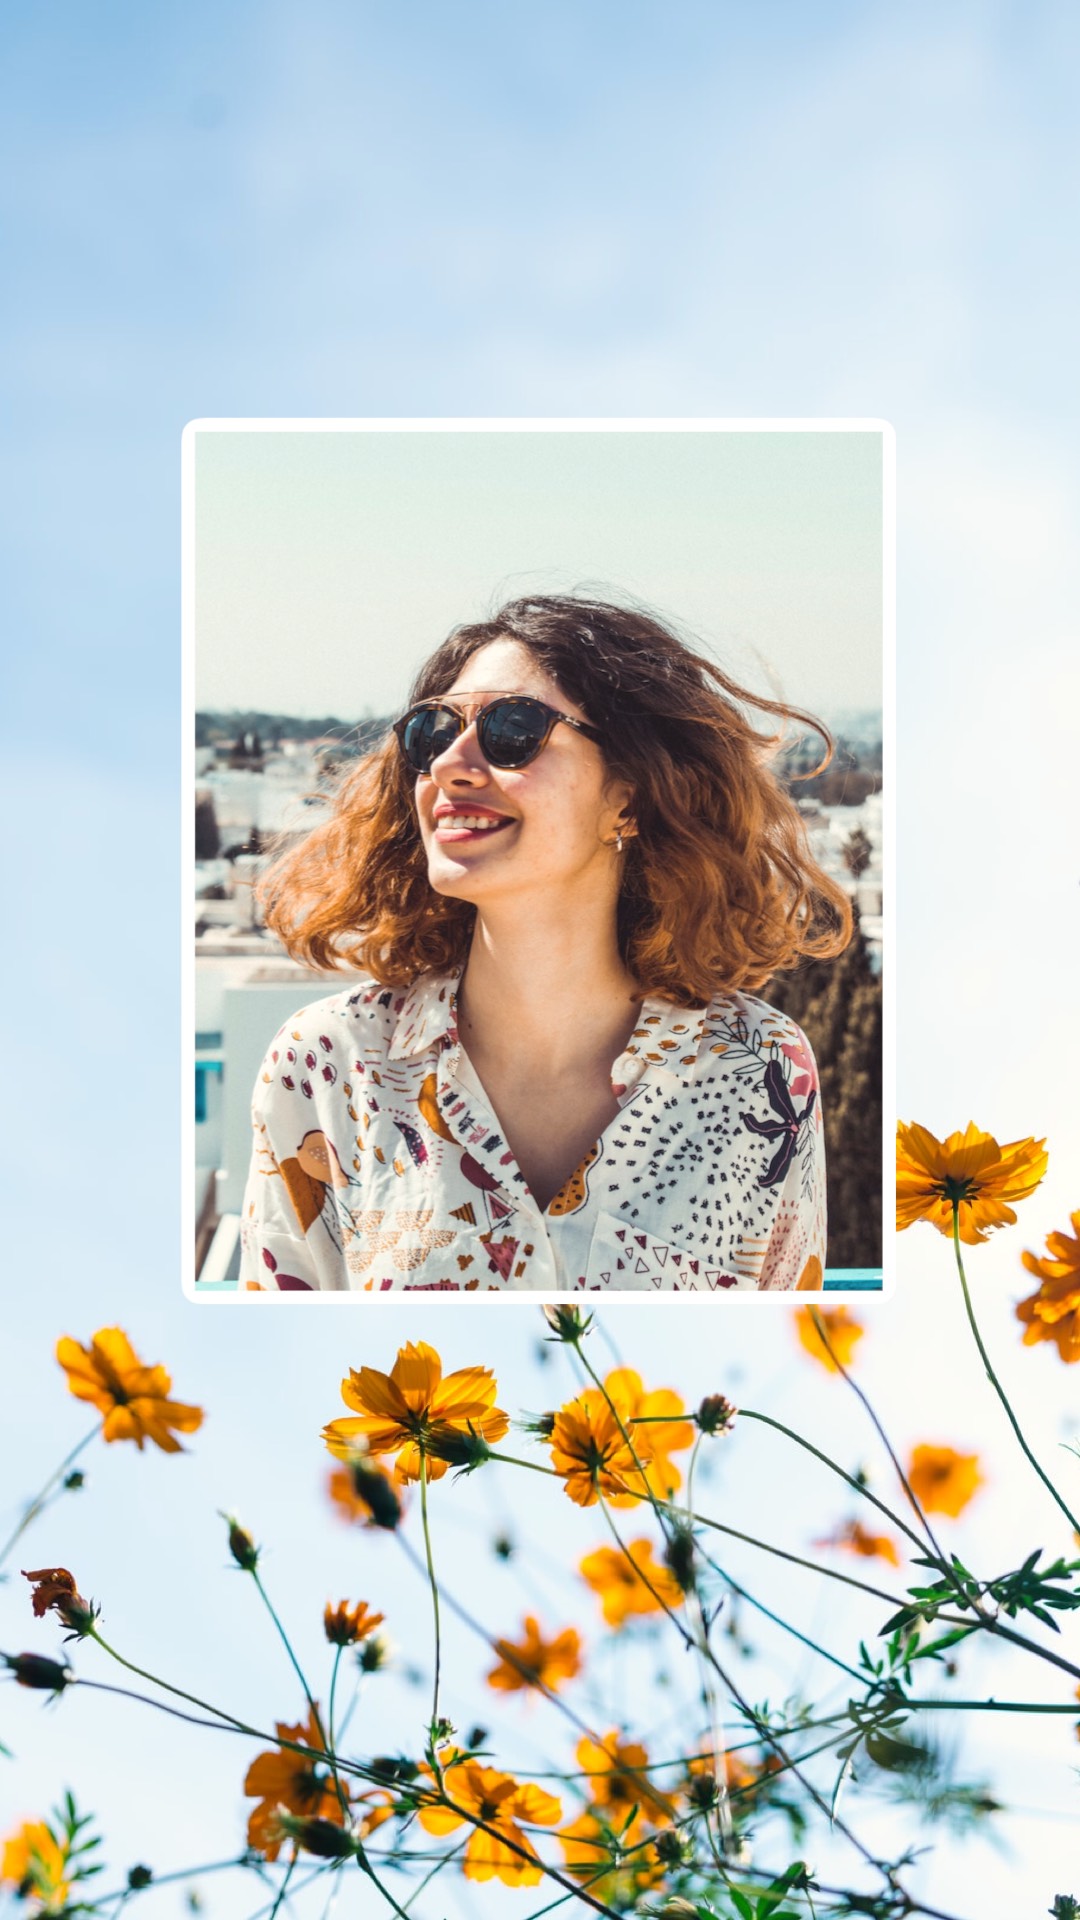 A Photo Of A Woman With Sun Glasses Spring Story Template